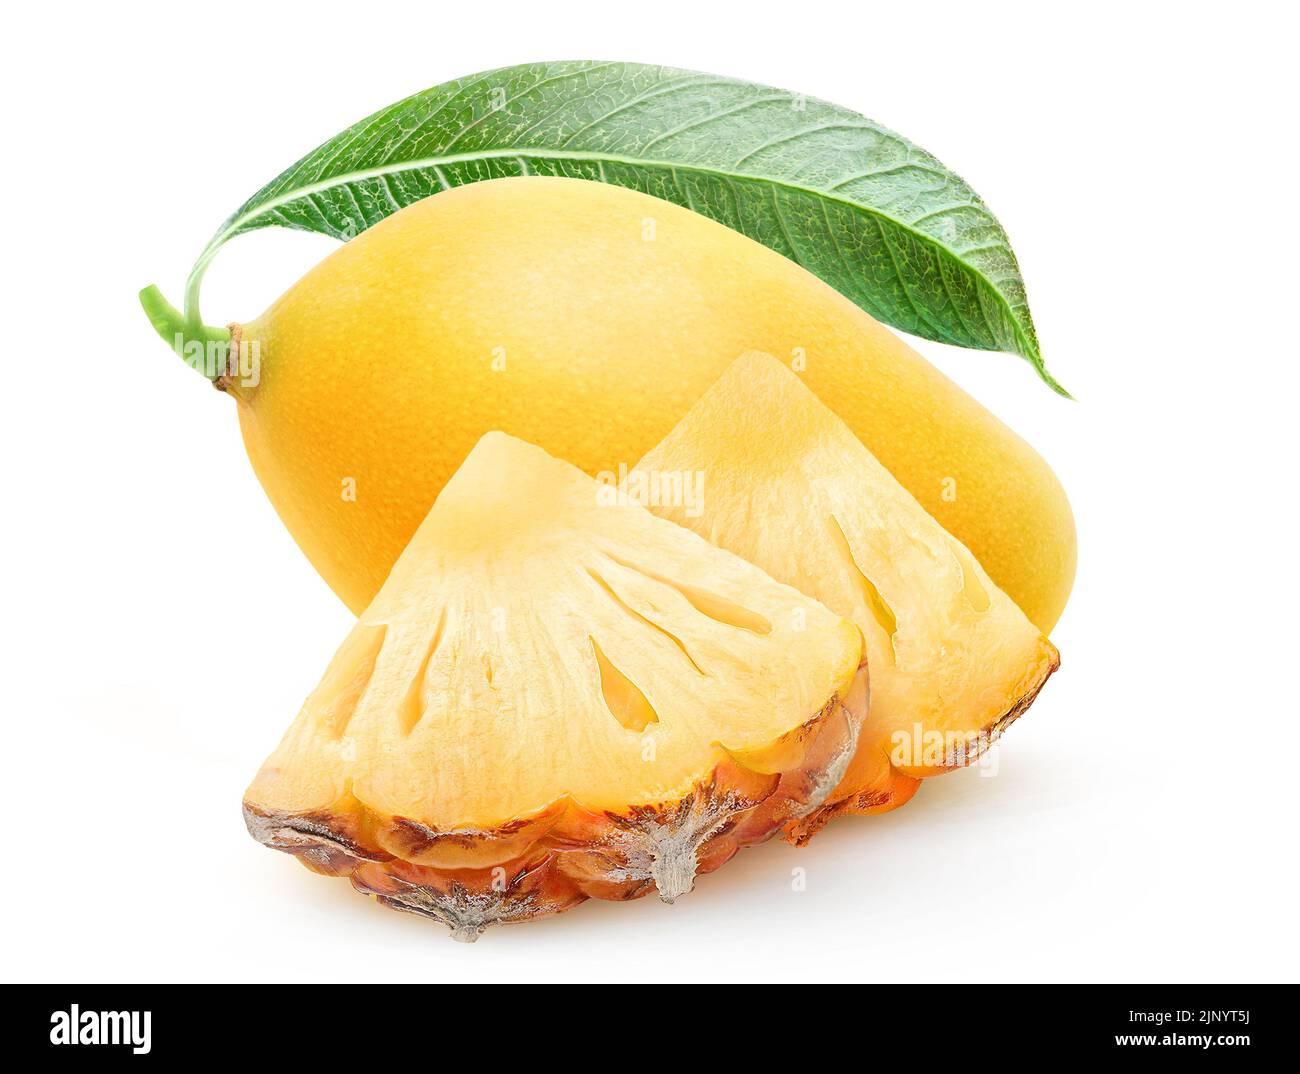 Yellow mango fruit and pieces of pineapple isolated on white background Stock Photo